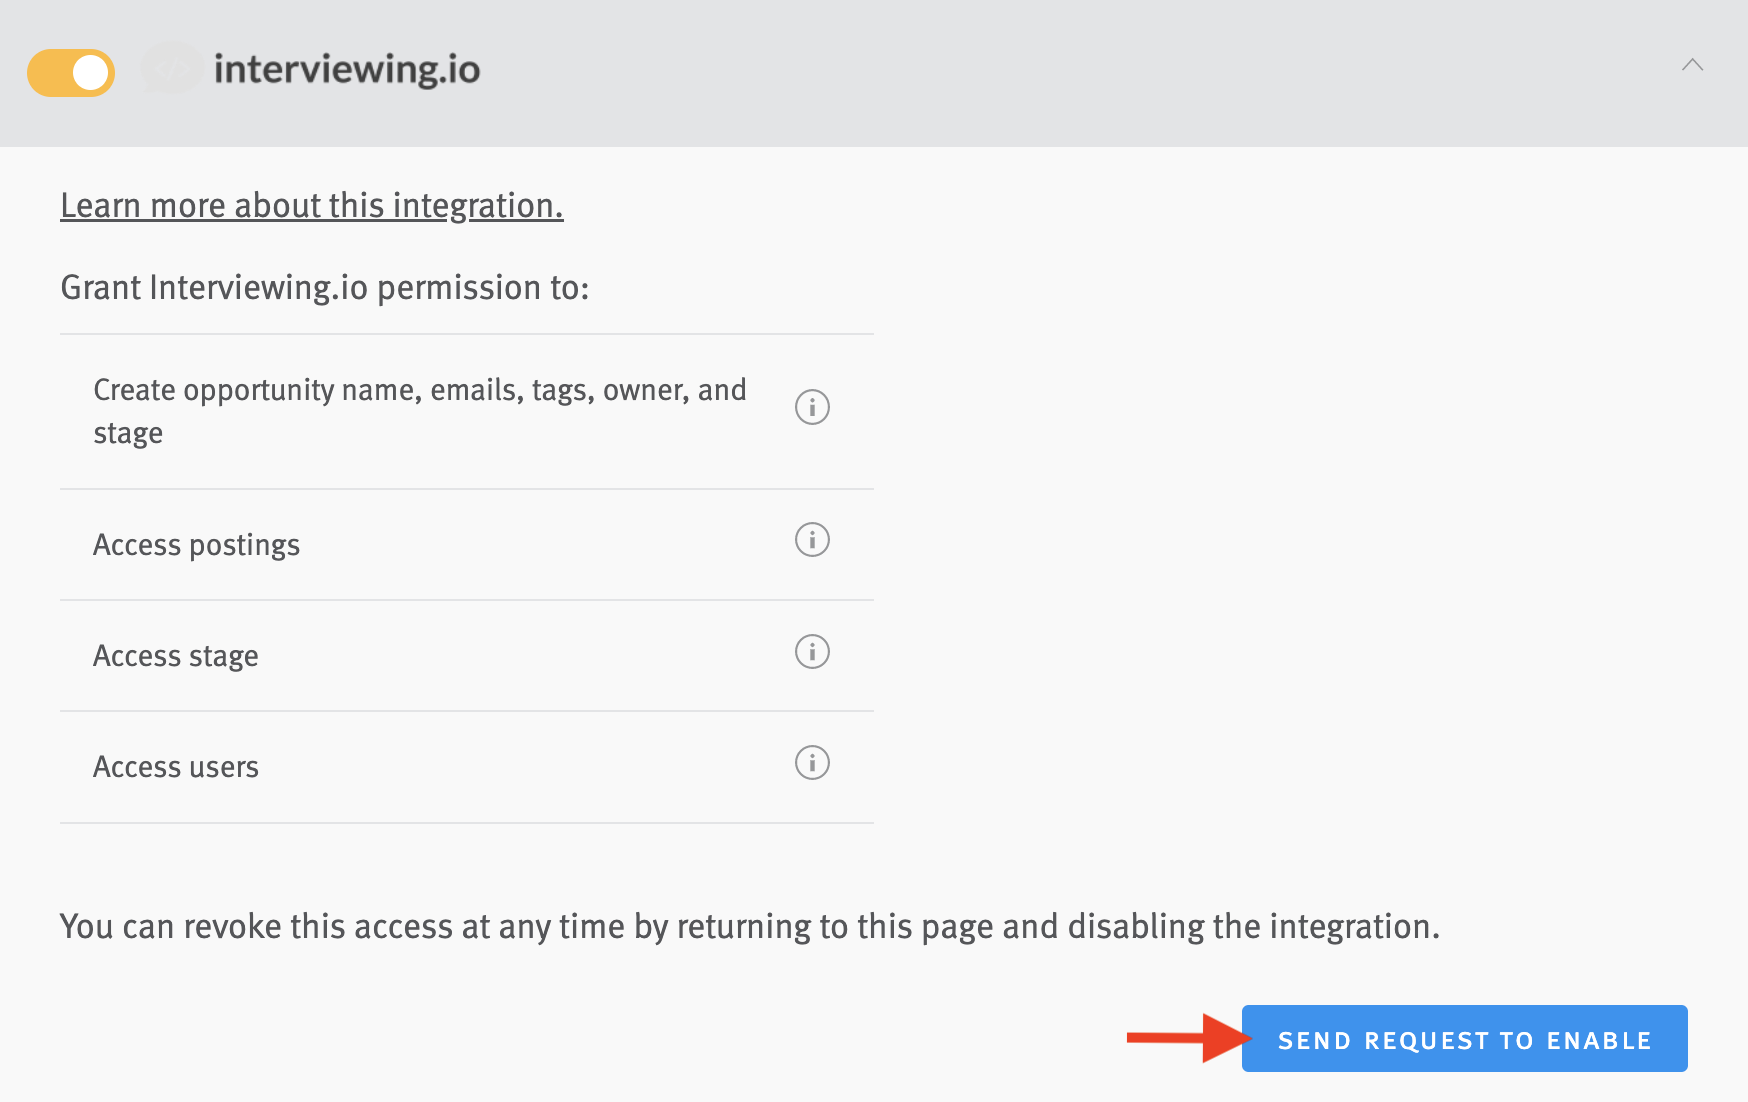 interviewing.io tile in Intergations Settings page in Lever. Arrow points to 'Send Request to Enable' button.